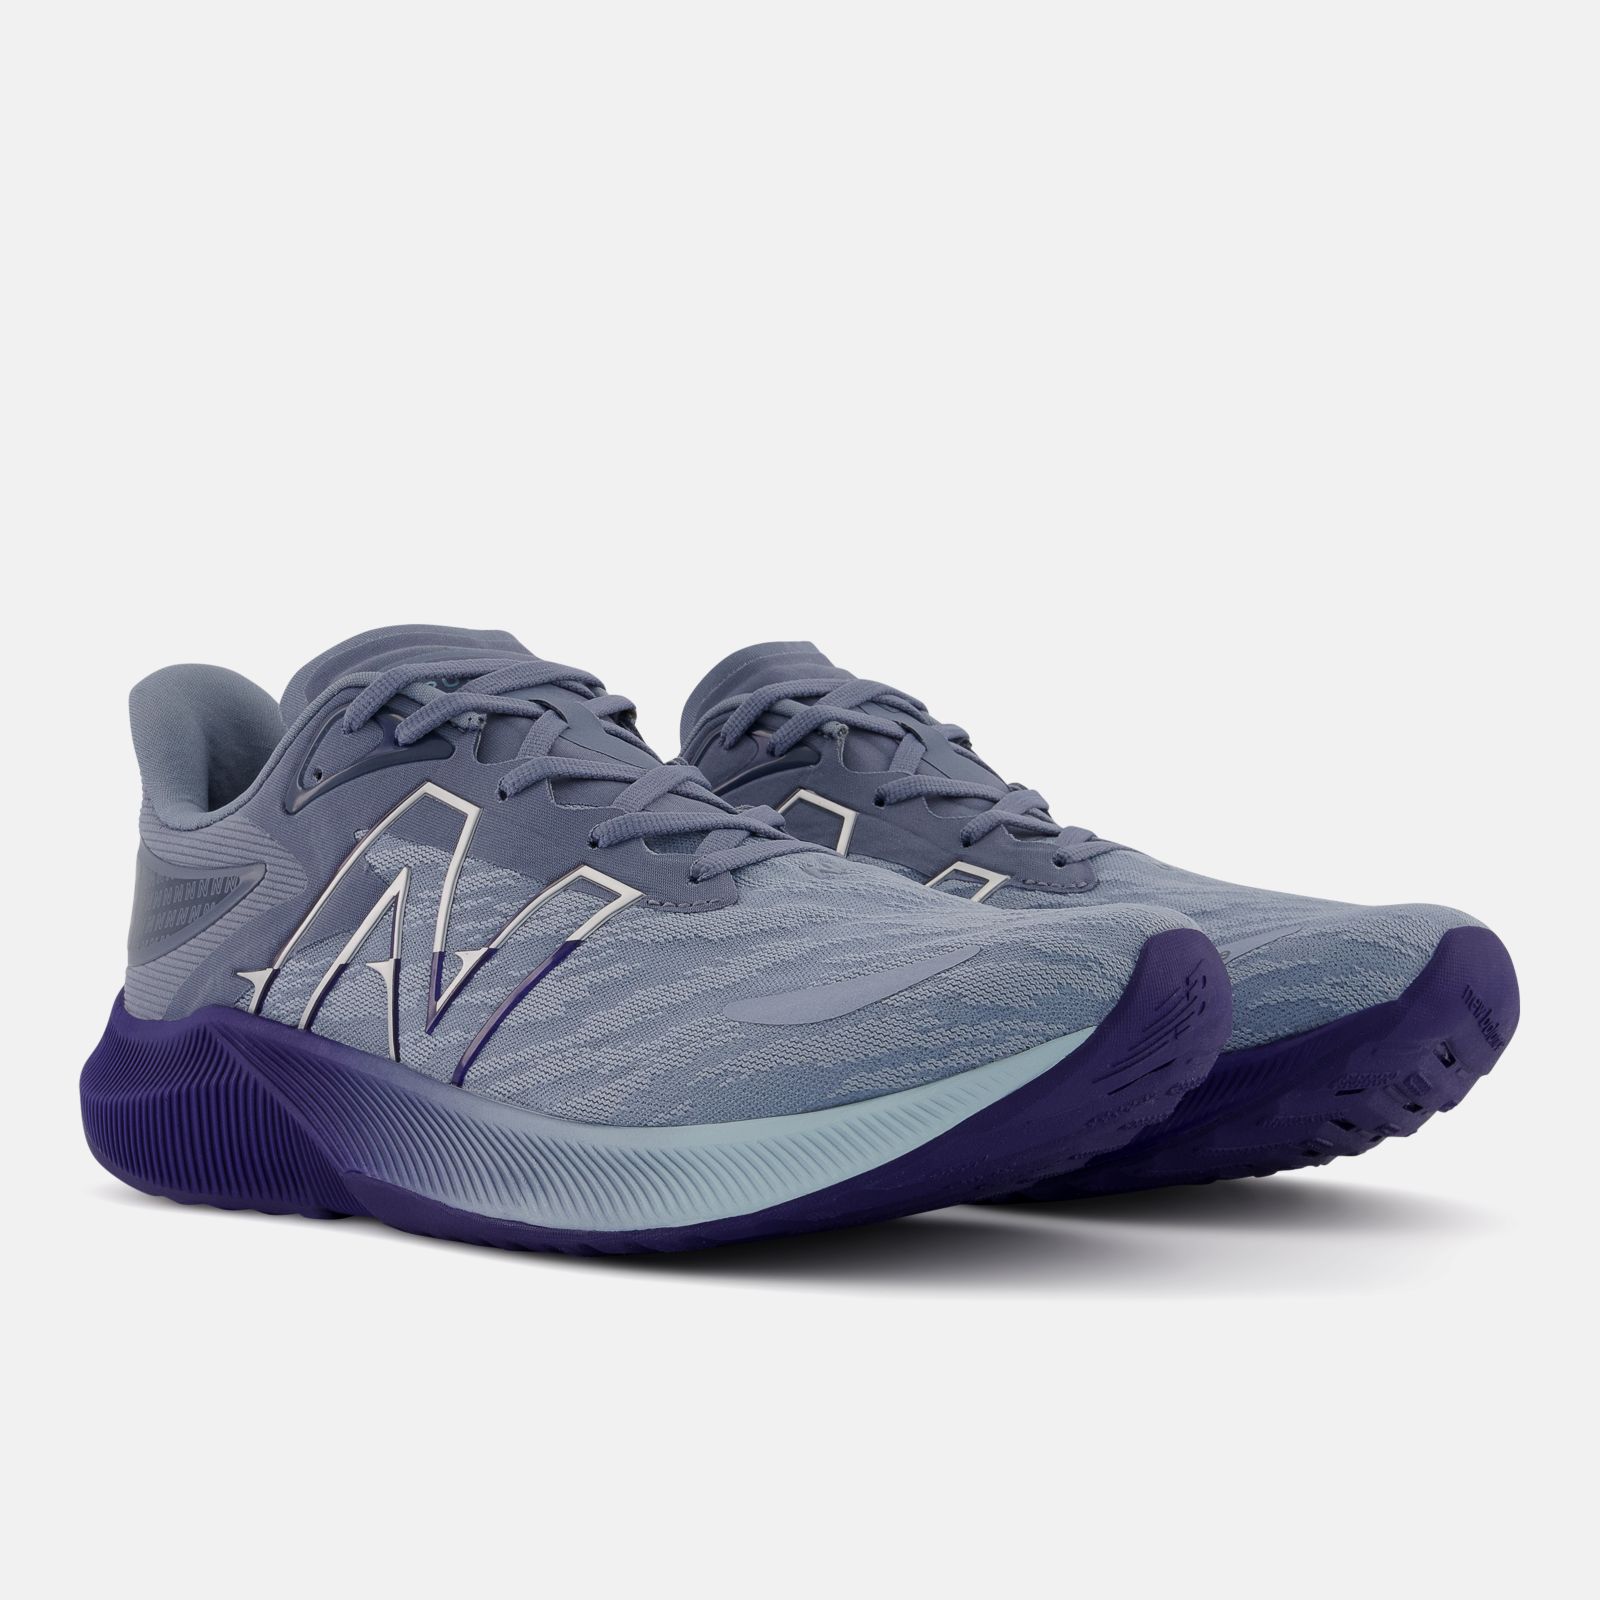 New Balance MFCPRCG3, Blue, large